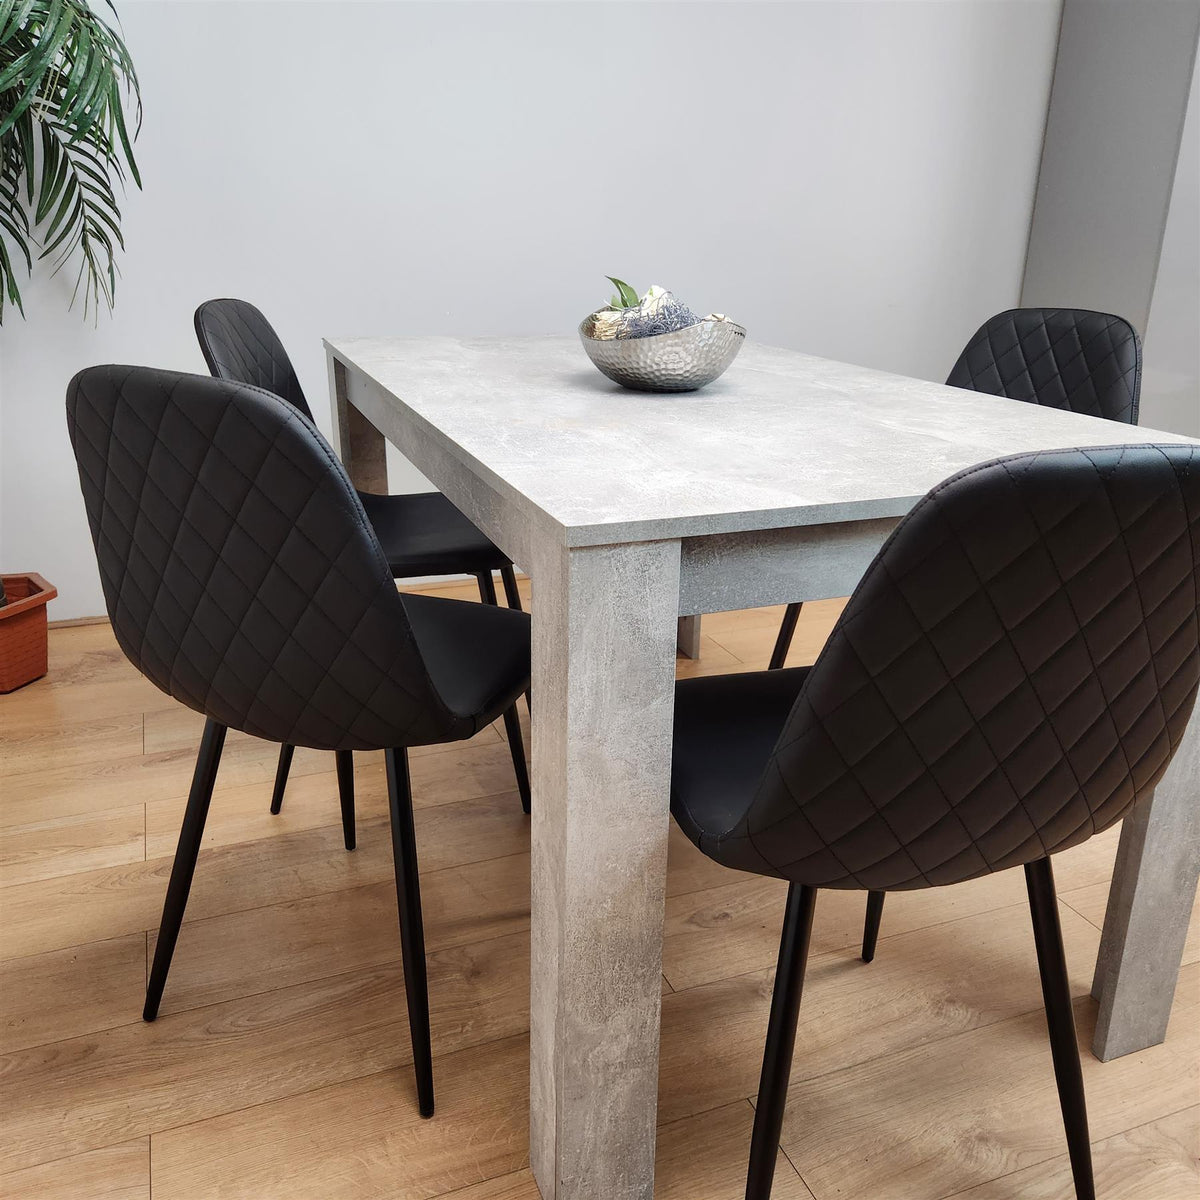 Dining Table and 4 Chairs Stone Grey Effect Wood Table 4 Black Leather Chairs Dining Room